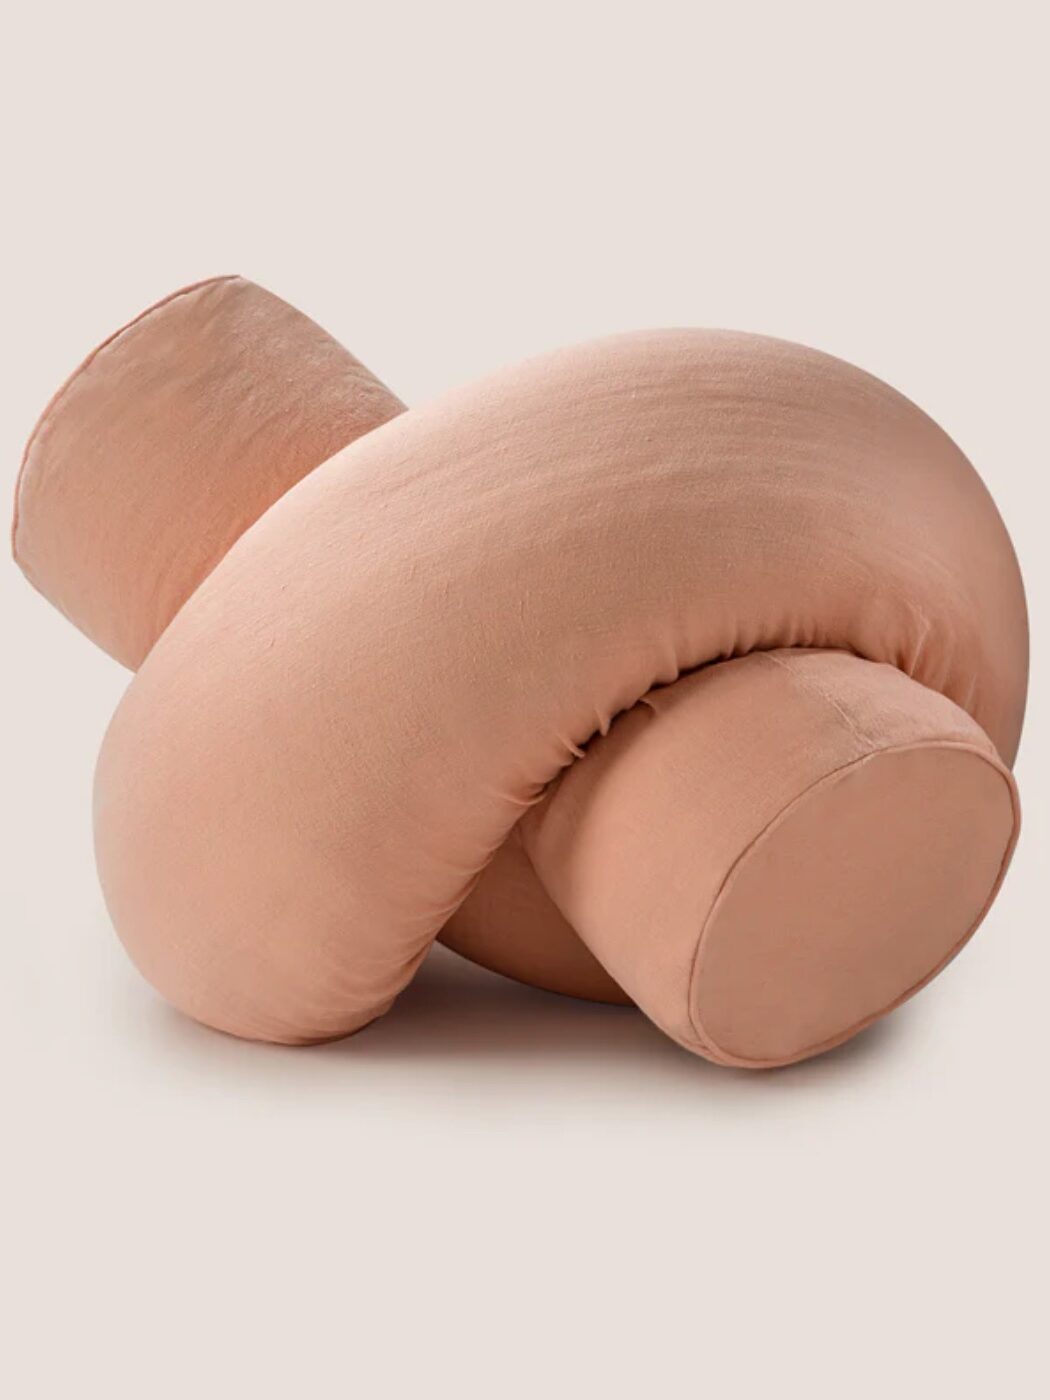 The Bearaby pillow in a pink cover tied into a knot.